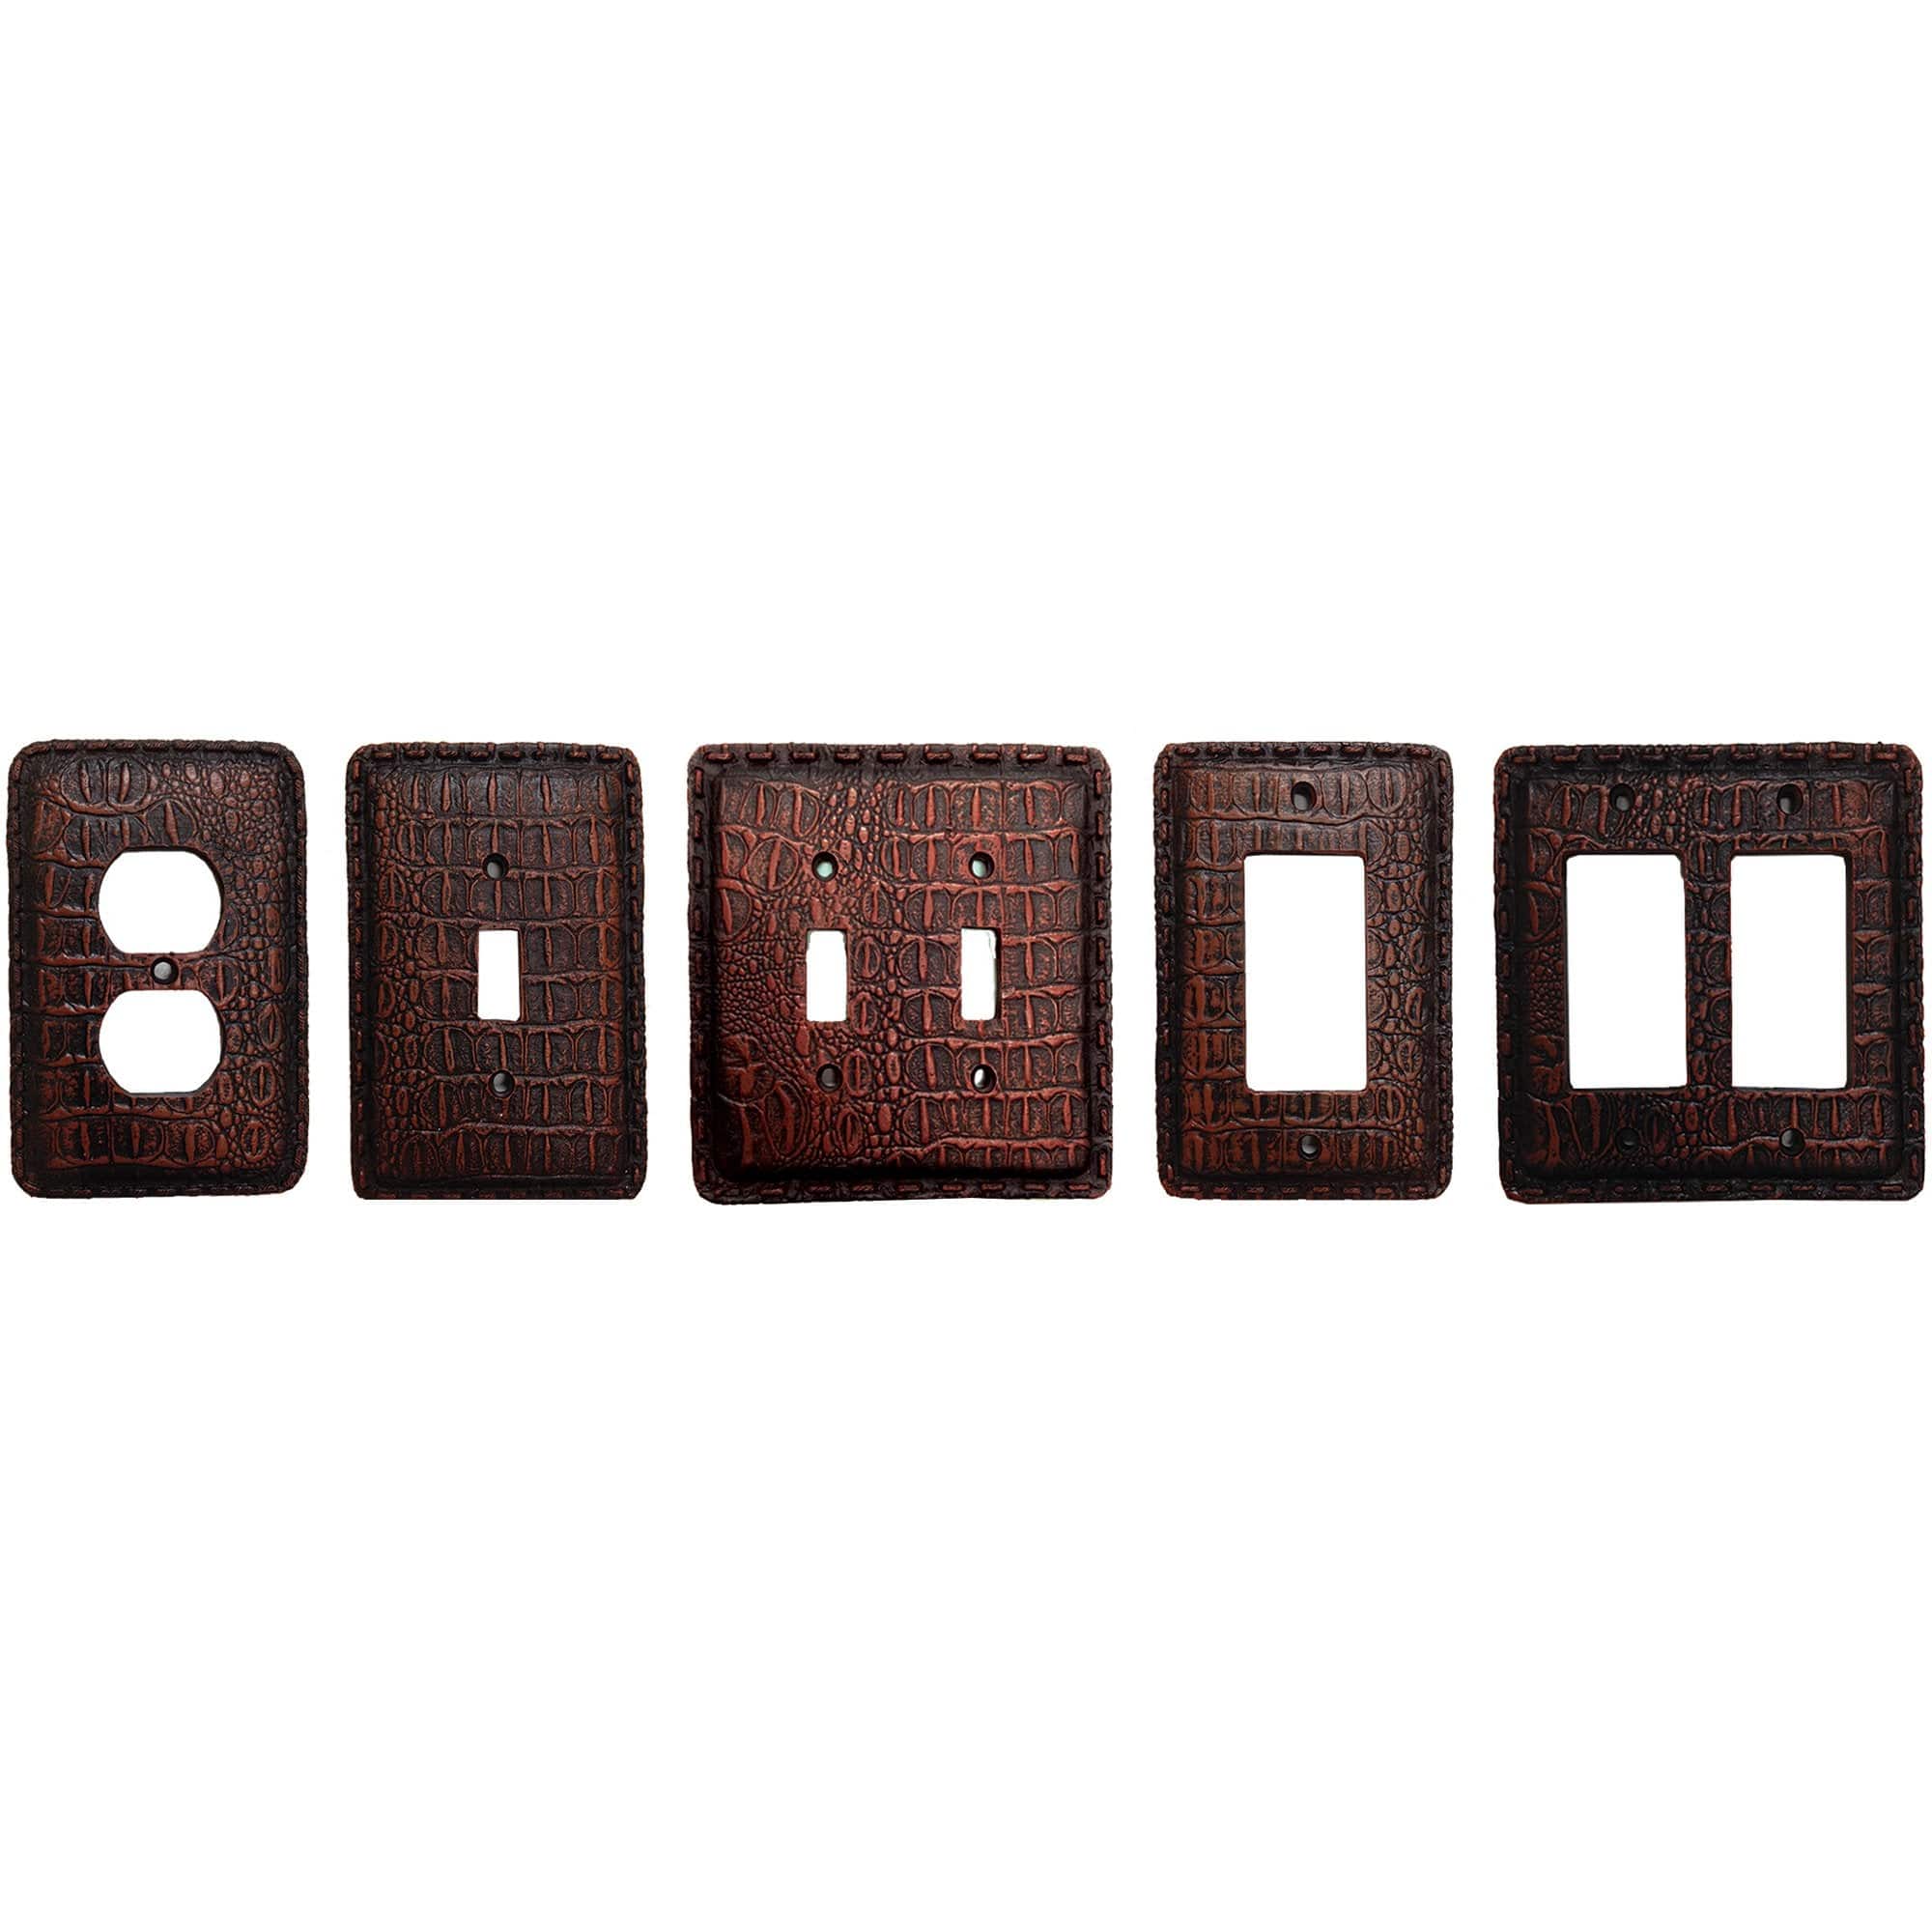 Resin Gator Single Rocker Wall Switch Plate Switch Plates & Outlet Covers